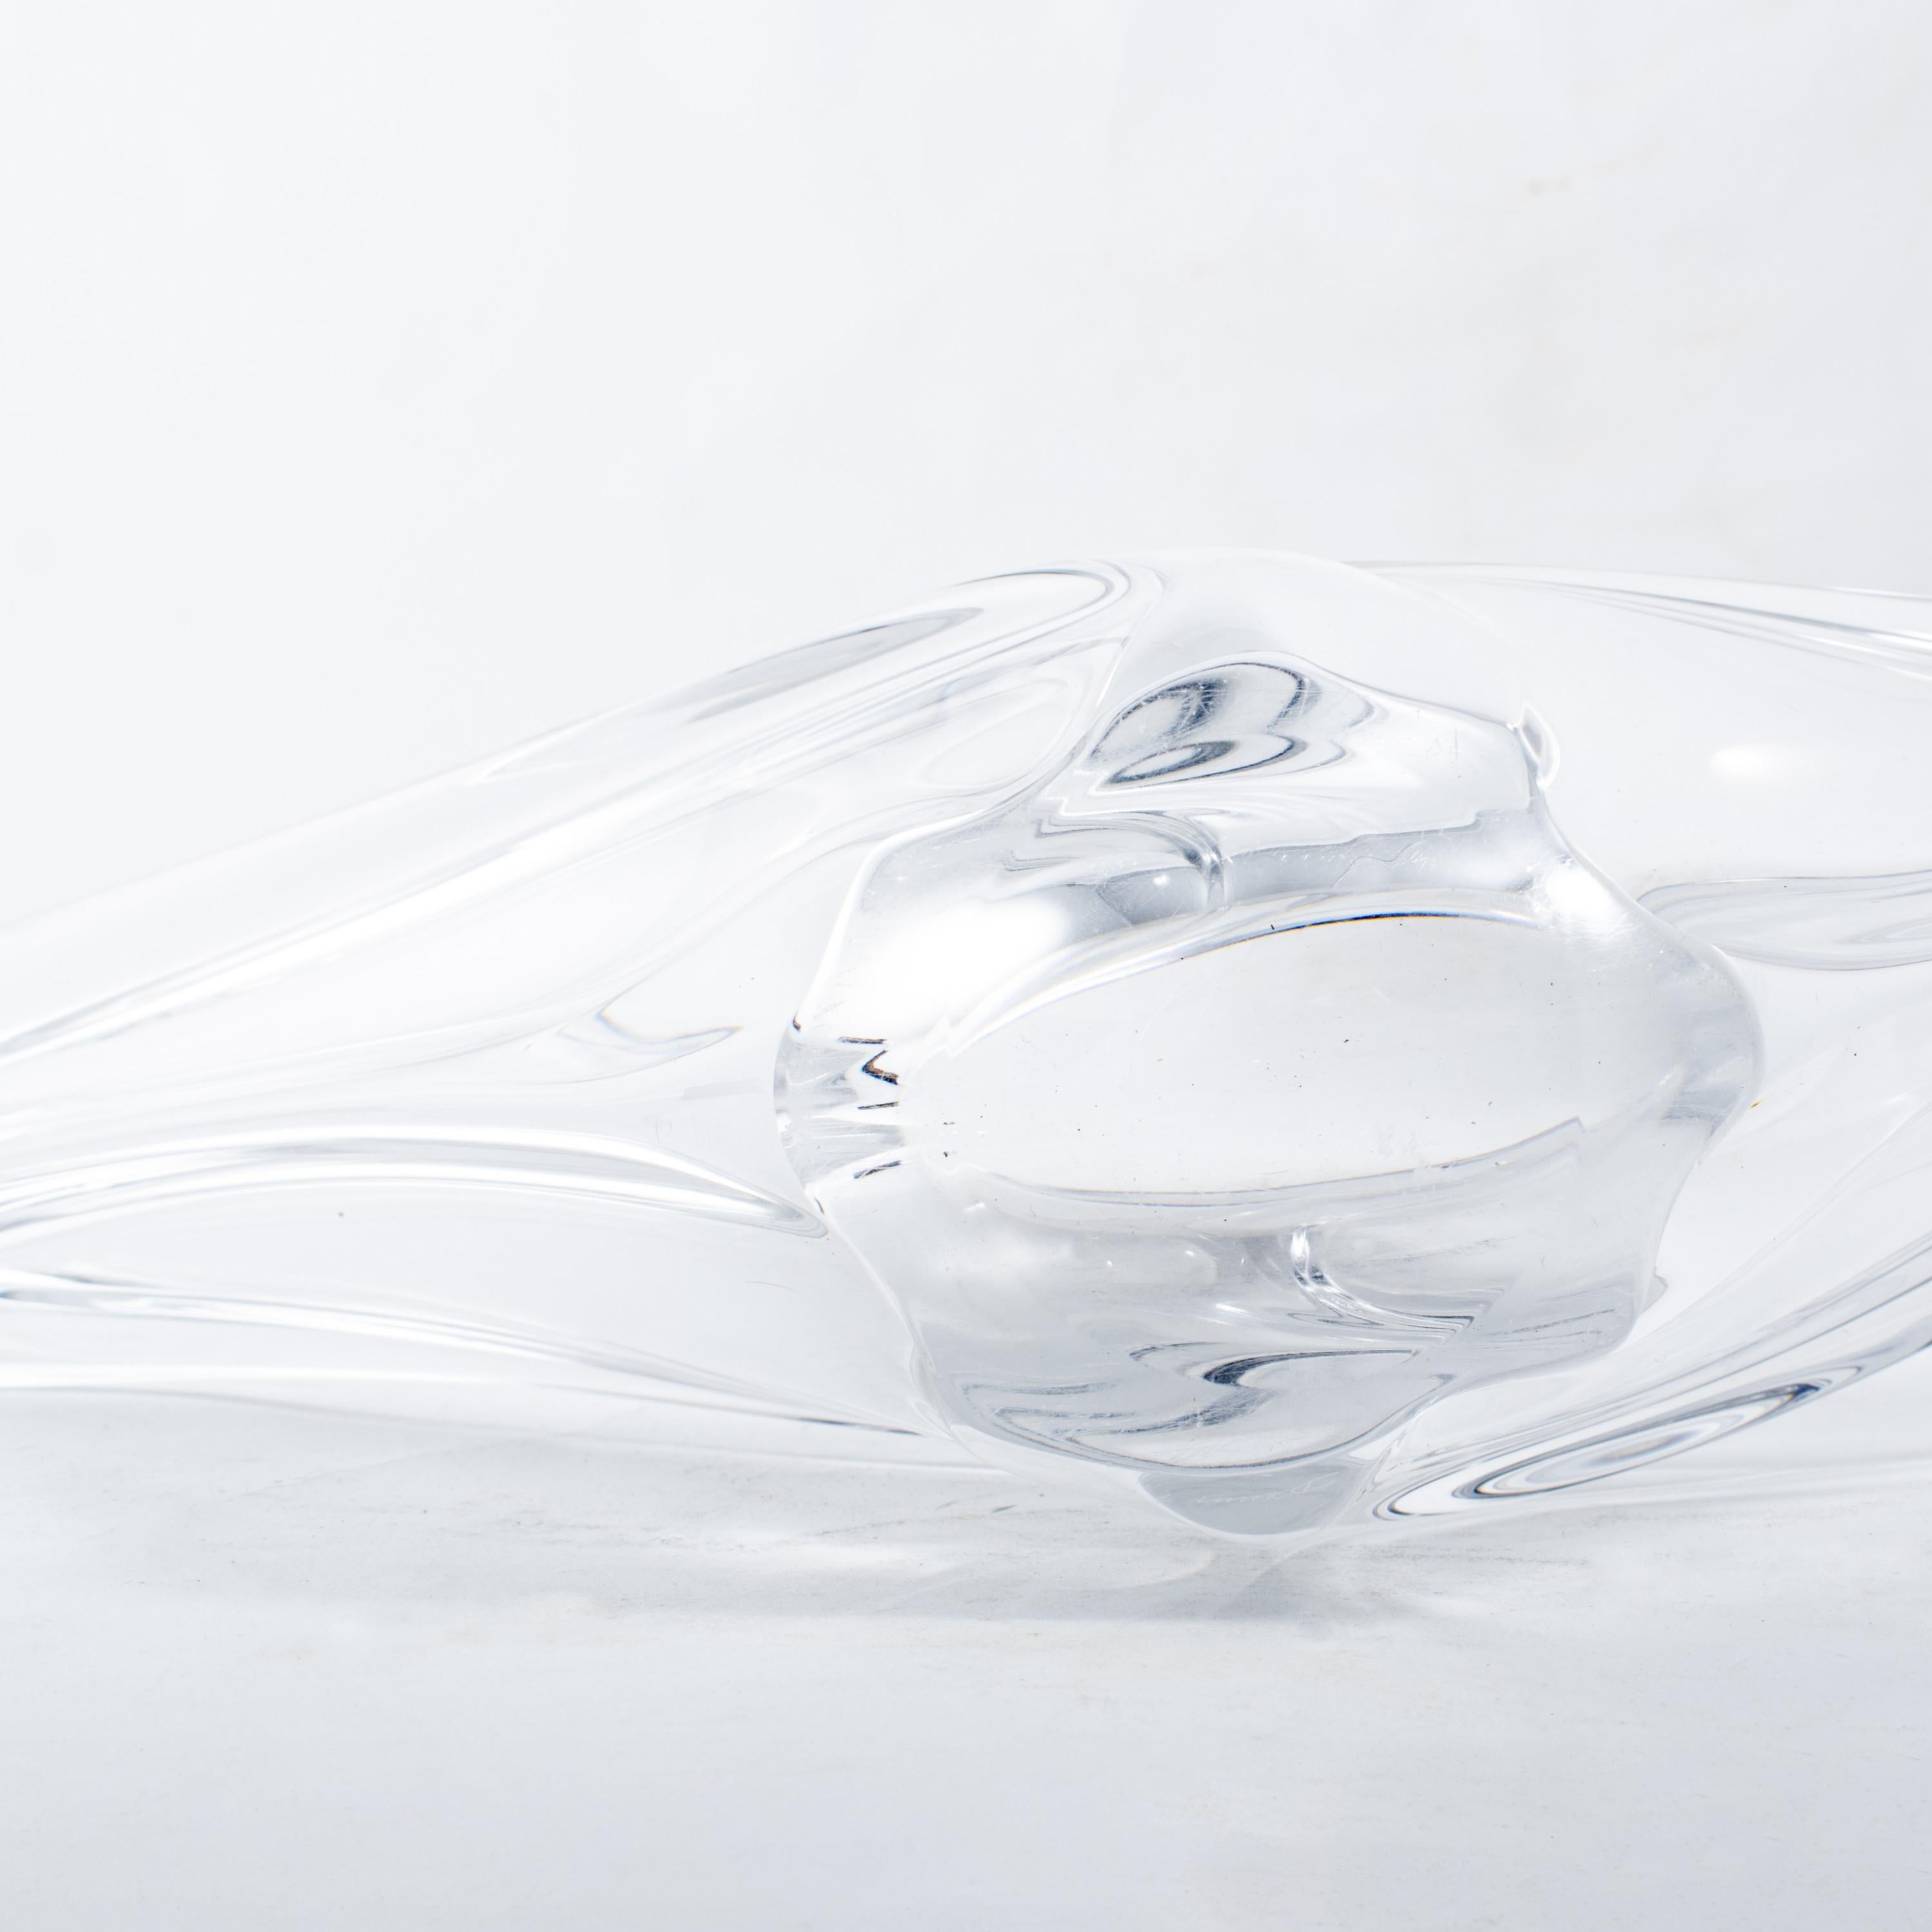 Sculptural Translucent Glass Bowl by Daum, France In Good Condition For Sale In Kastrup, DK